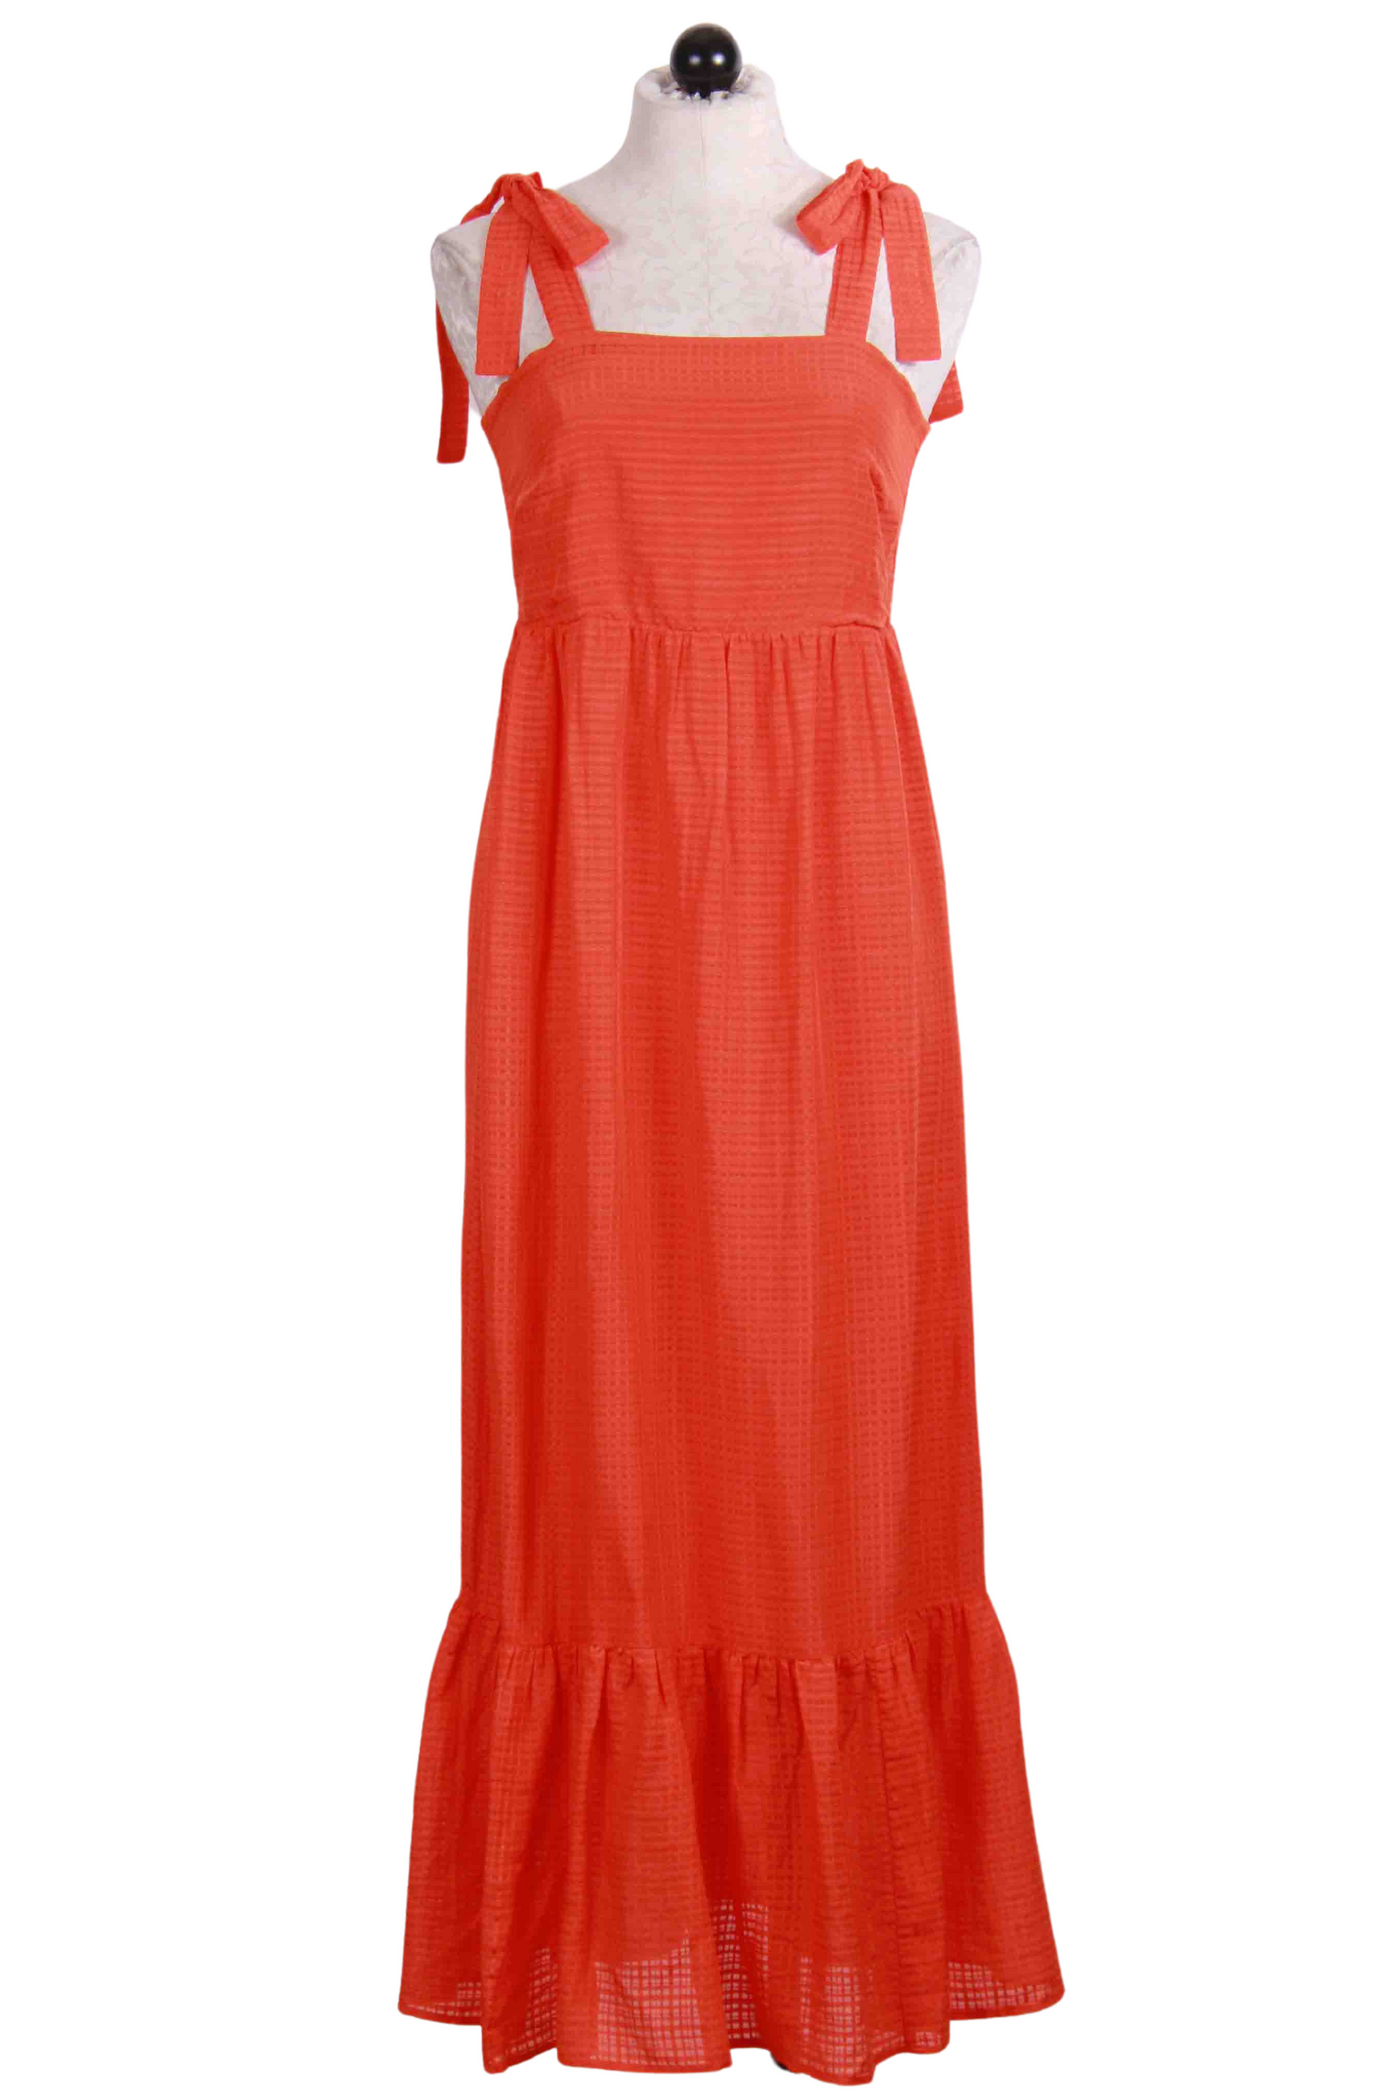 Blaze colored Abby Maxi Tank Dress by Marie Oliver